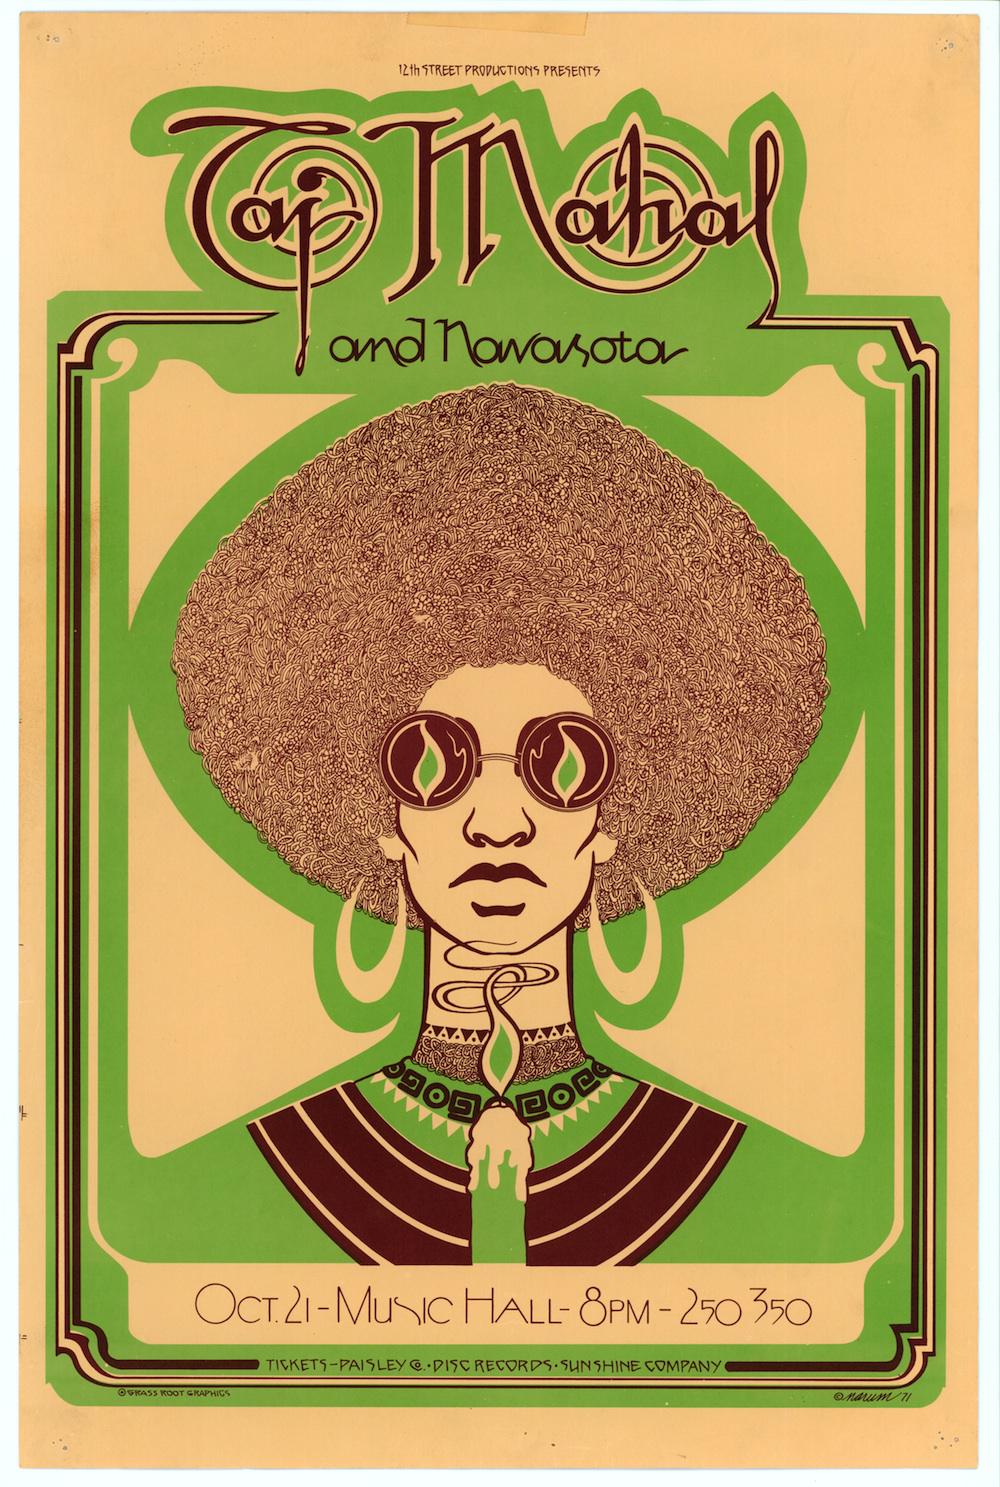 Austin music history: Music posters from the 1960s and 1970s.